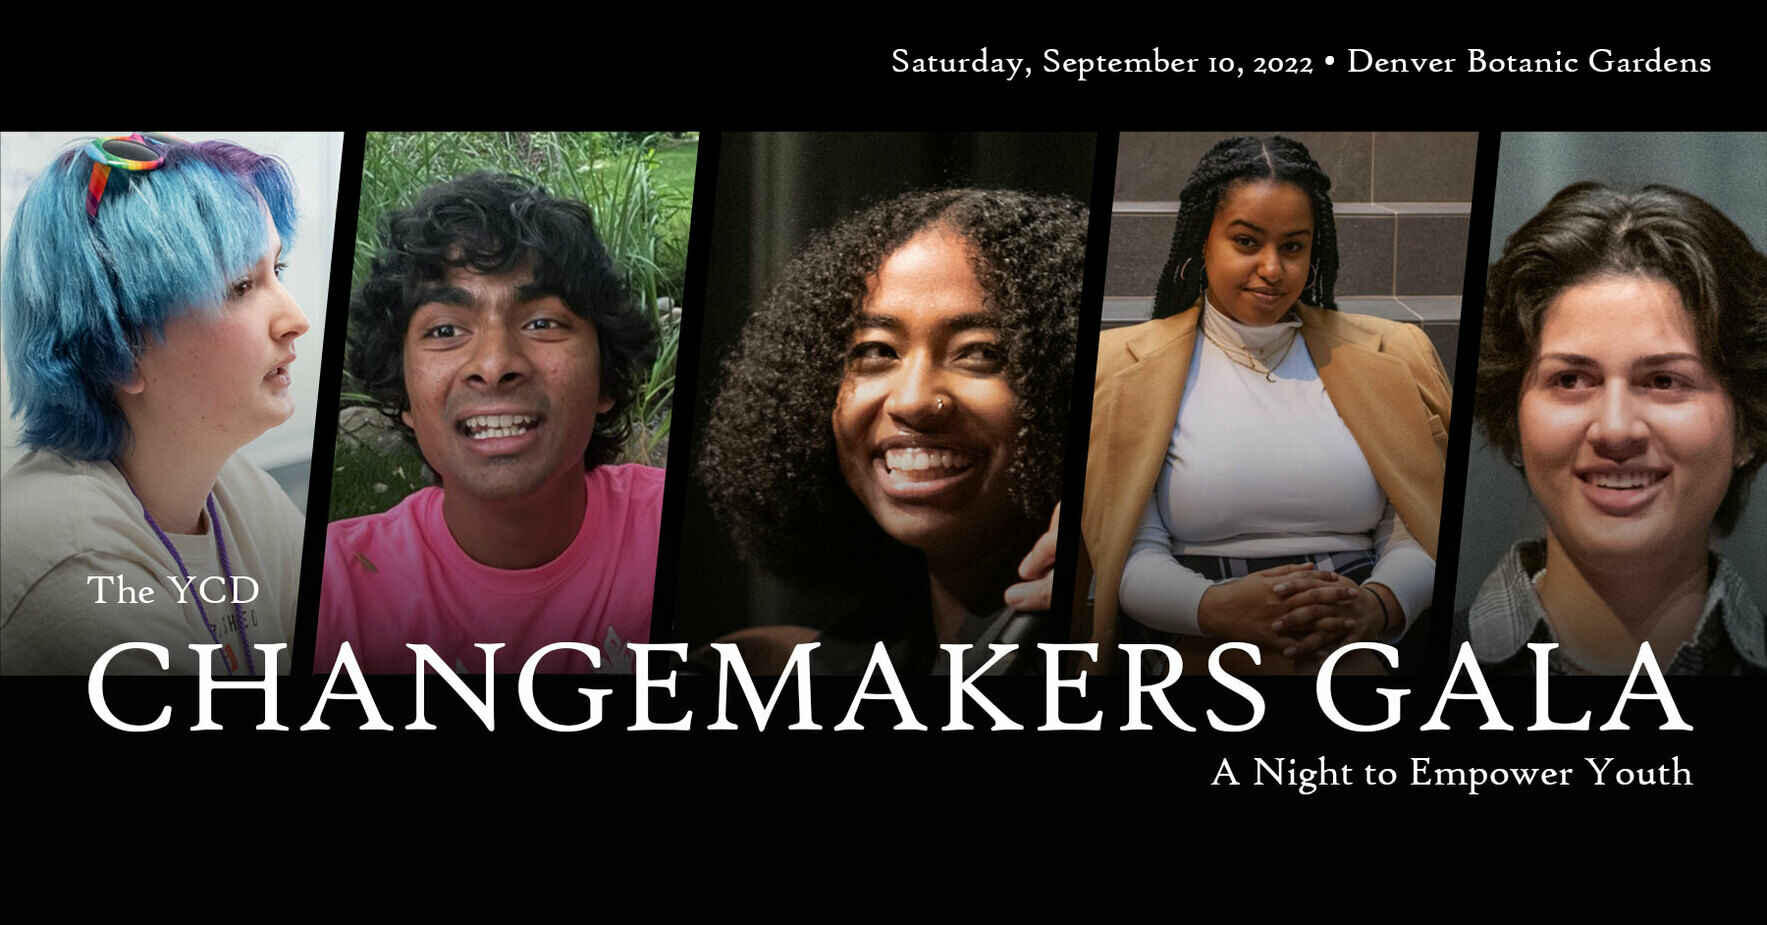 The YCD Changemakers Gala: A Night to Empower Youth